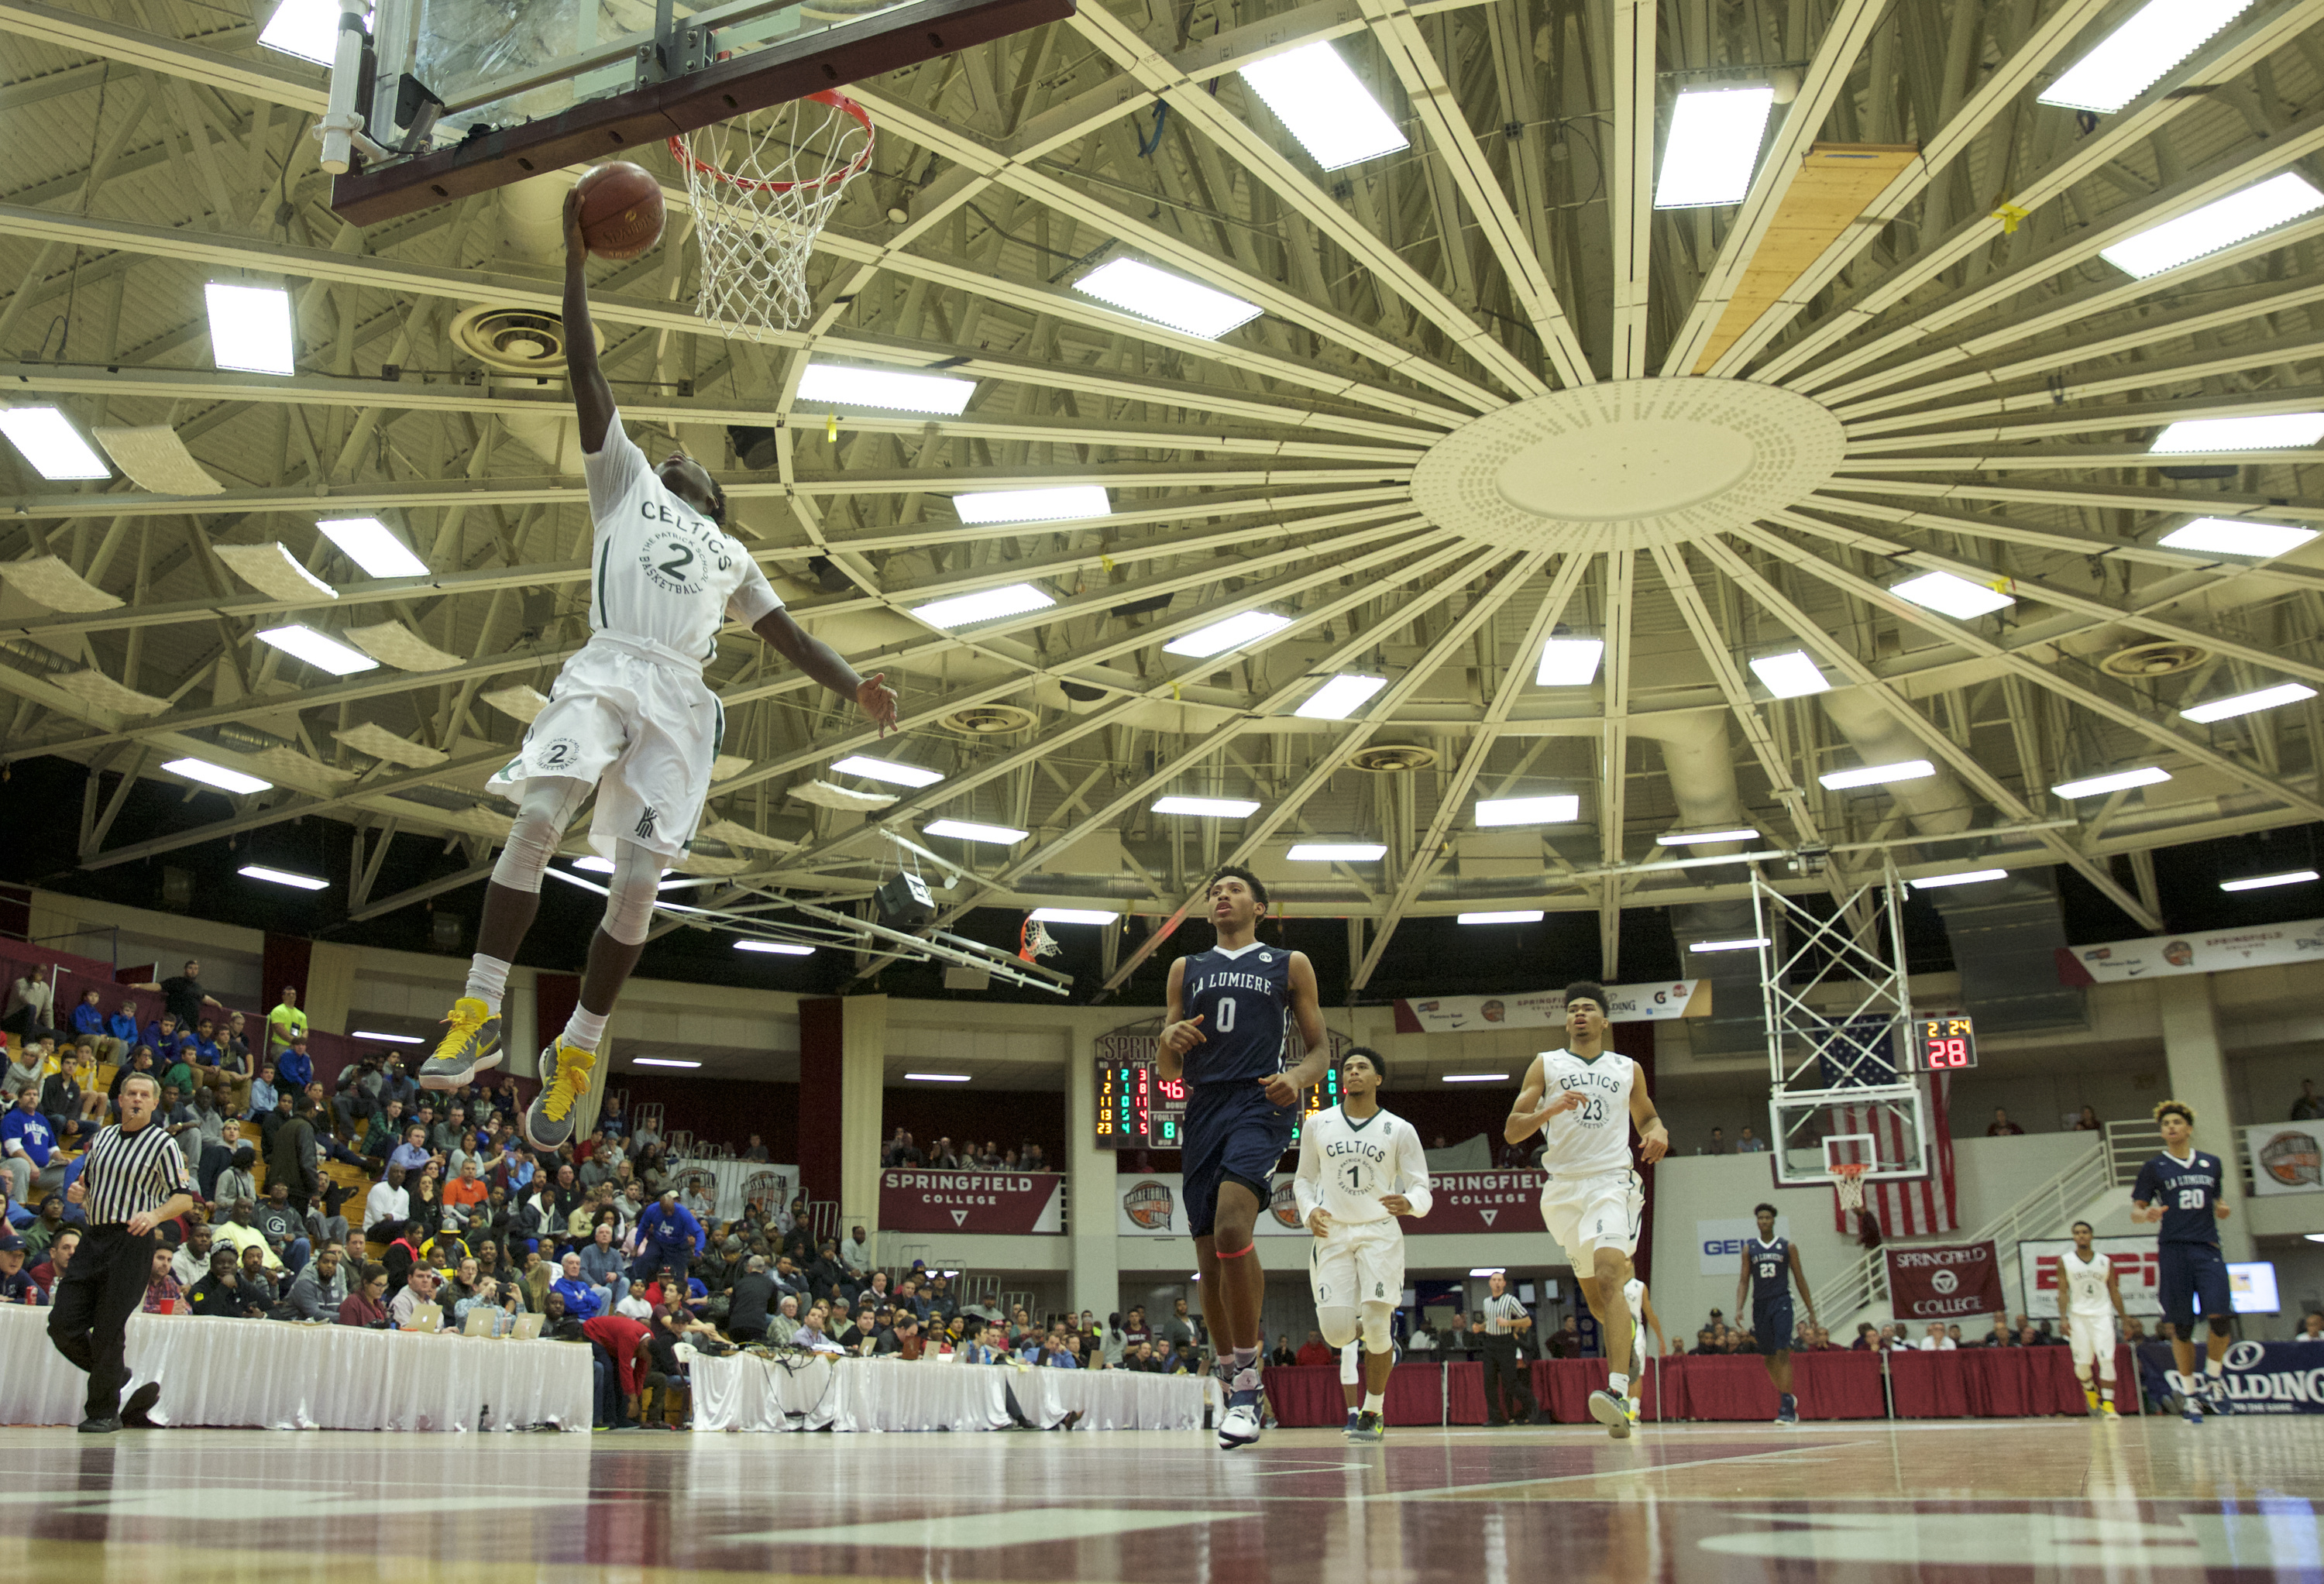 There was plenty of action at the Hoophall Classic (Photo: David Butler II, USA TODAY Sports)